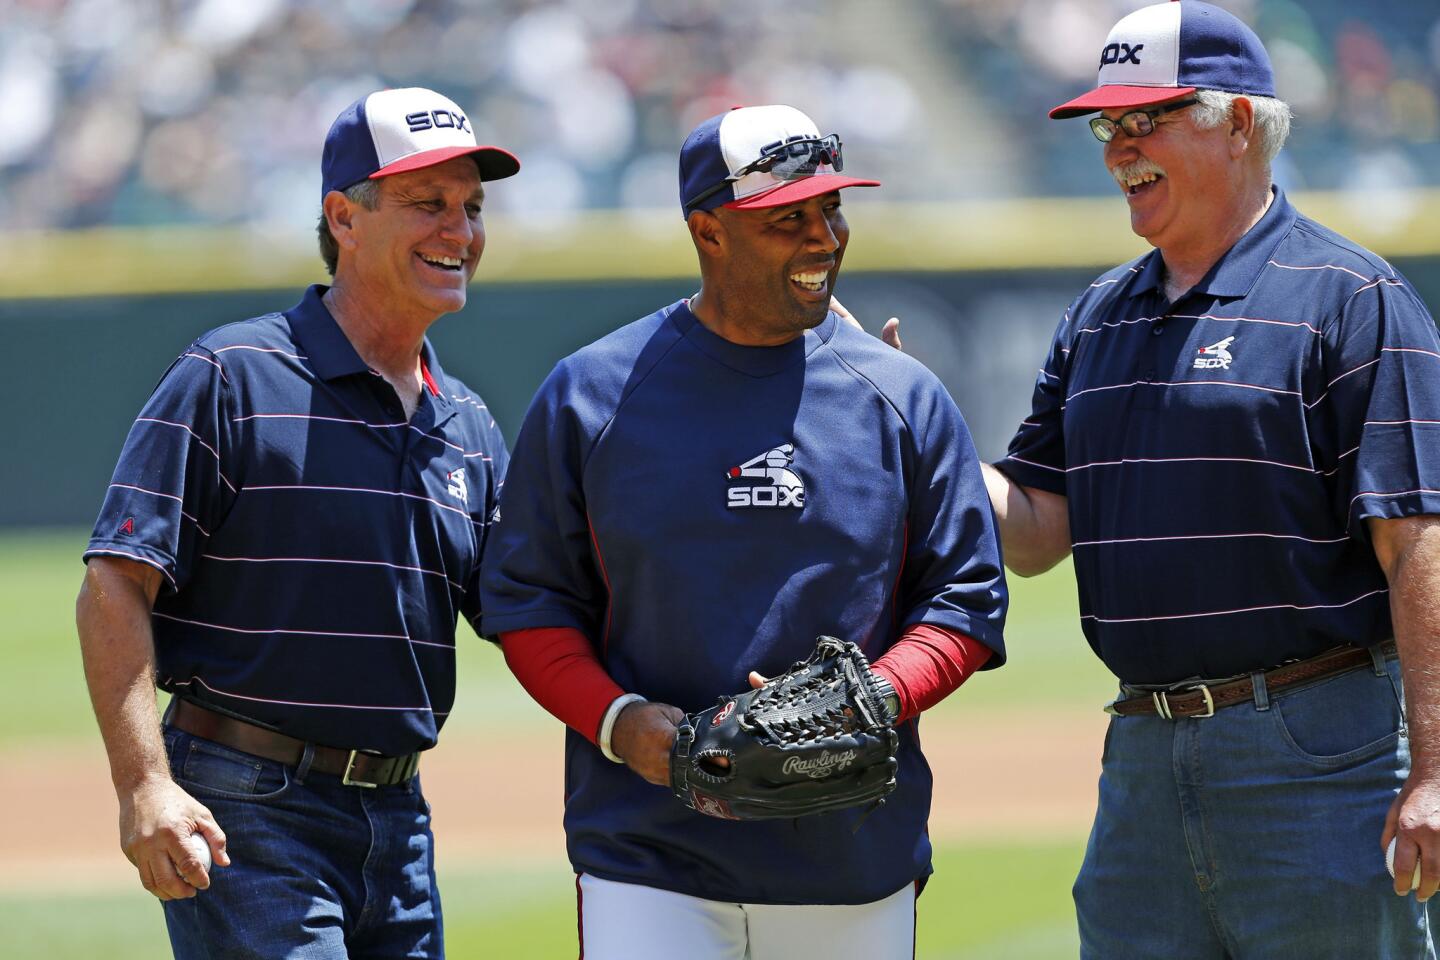 Former White Sox players Floyd Bannister, White Sox assistant hitting coach Harold Baines and Dennis Lamp chat before a game at U.S. Cellular Field on June 30, 2013.